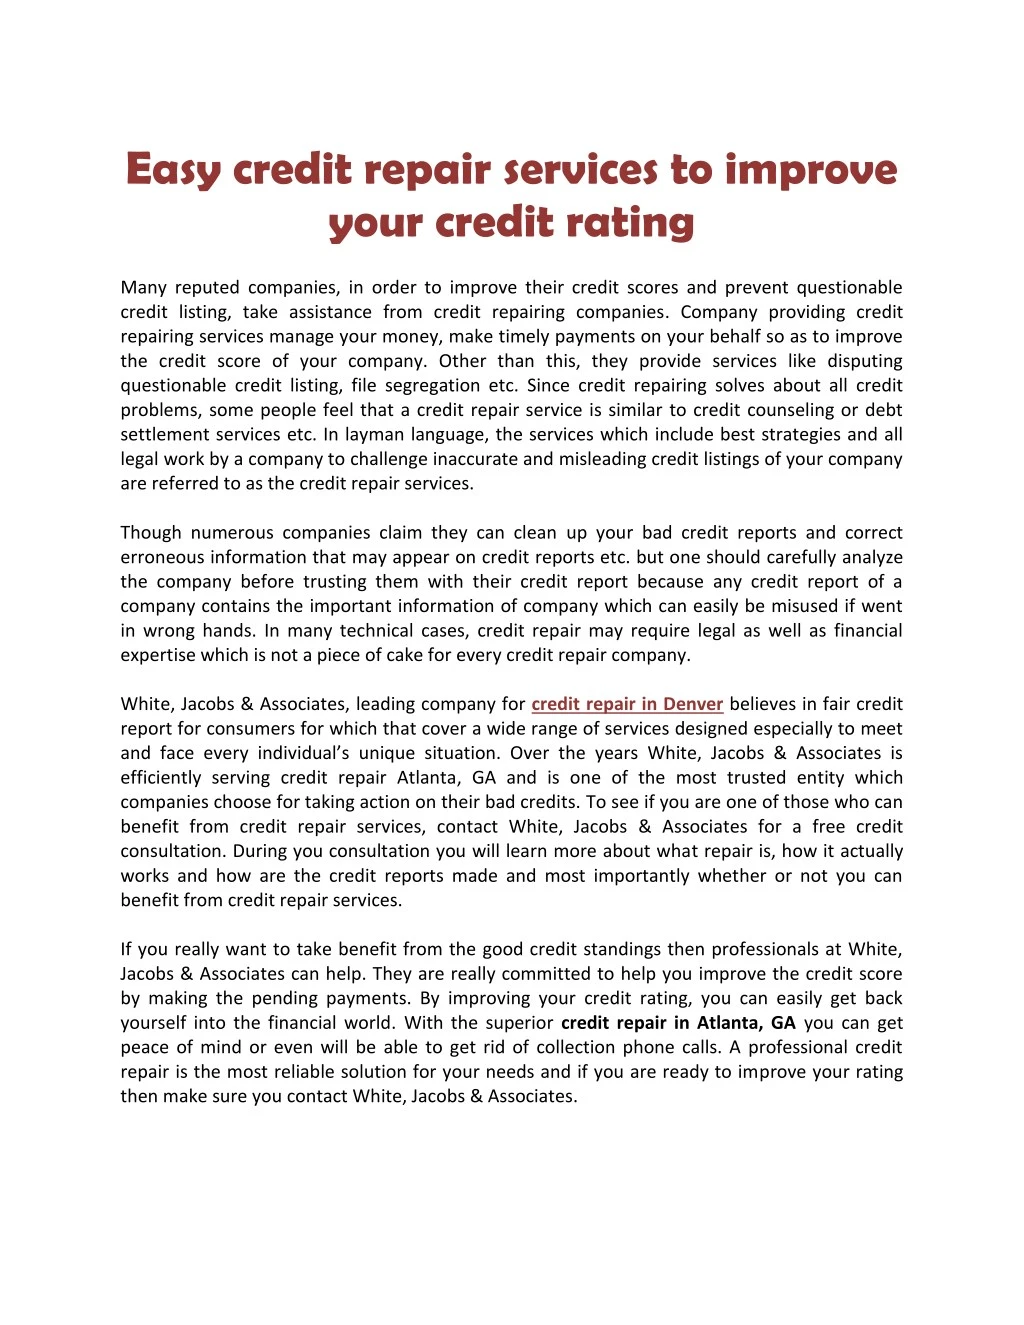 easy credit repair services to improve your